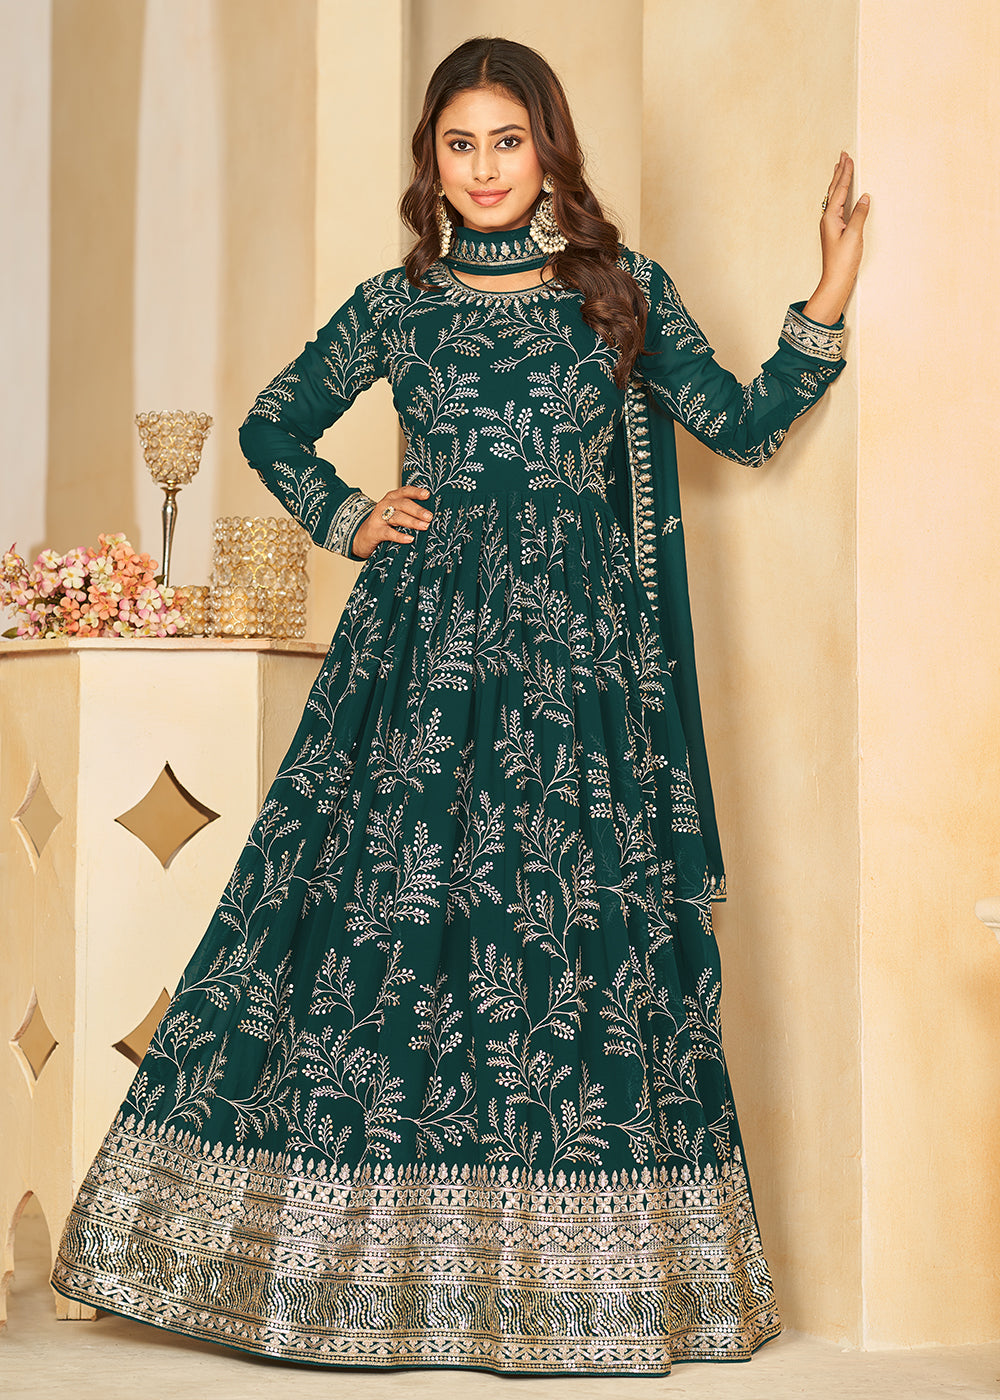 Buy Now Embroidered Lovely Green Georgette Wedding Anarkali Suit Online in USA, UK, Australia, New Zealand, Canada & Worldwide at Empress Clothing.